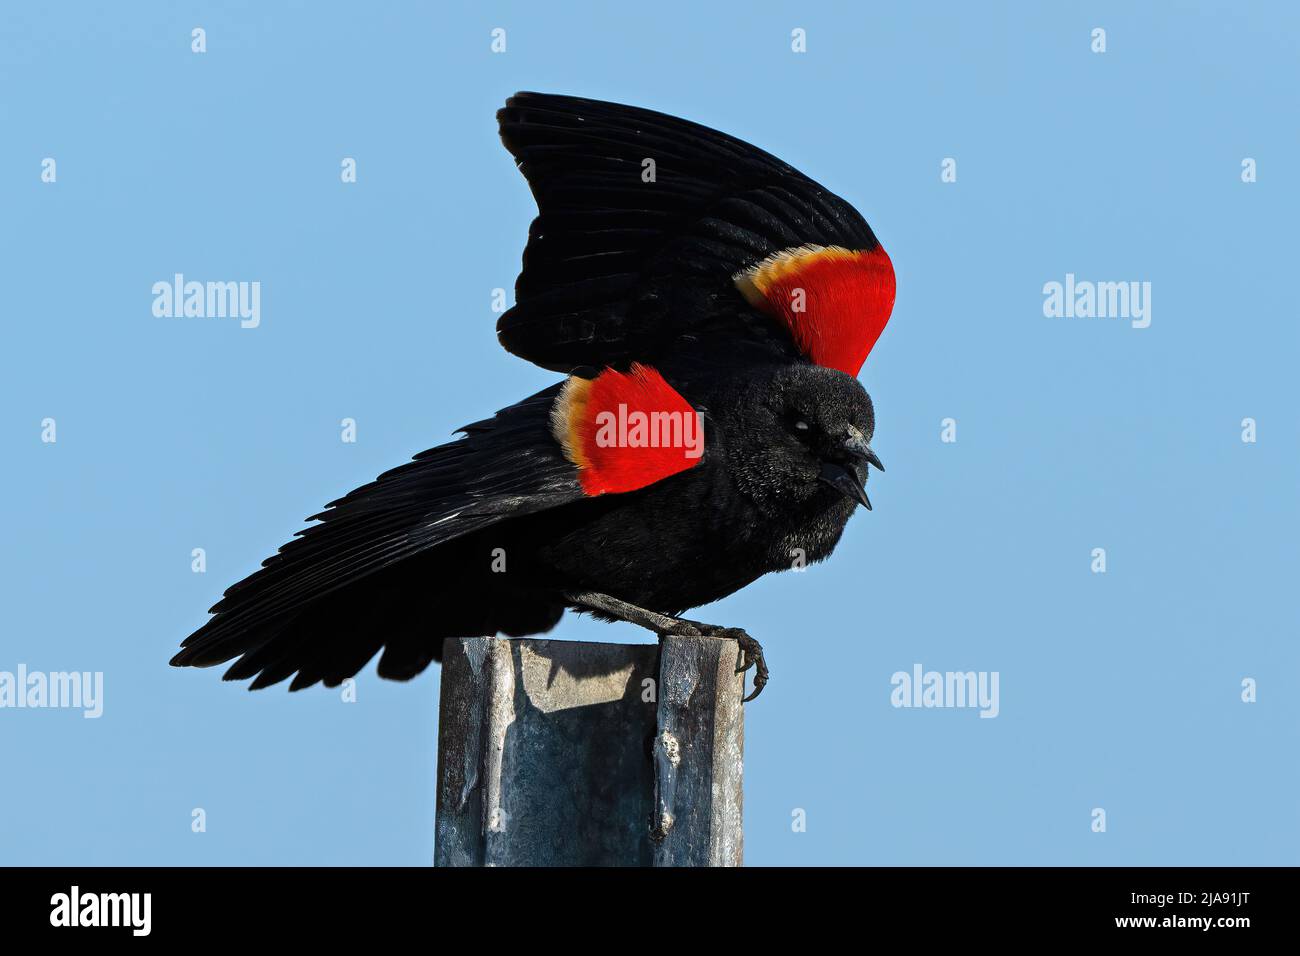 A Red-winged Blackbird Standing on Fence Post Stock Photo